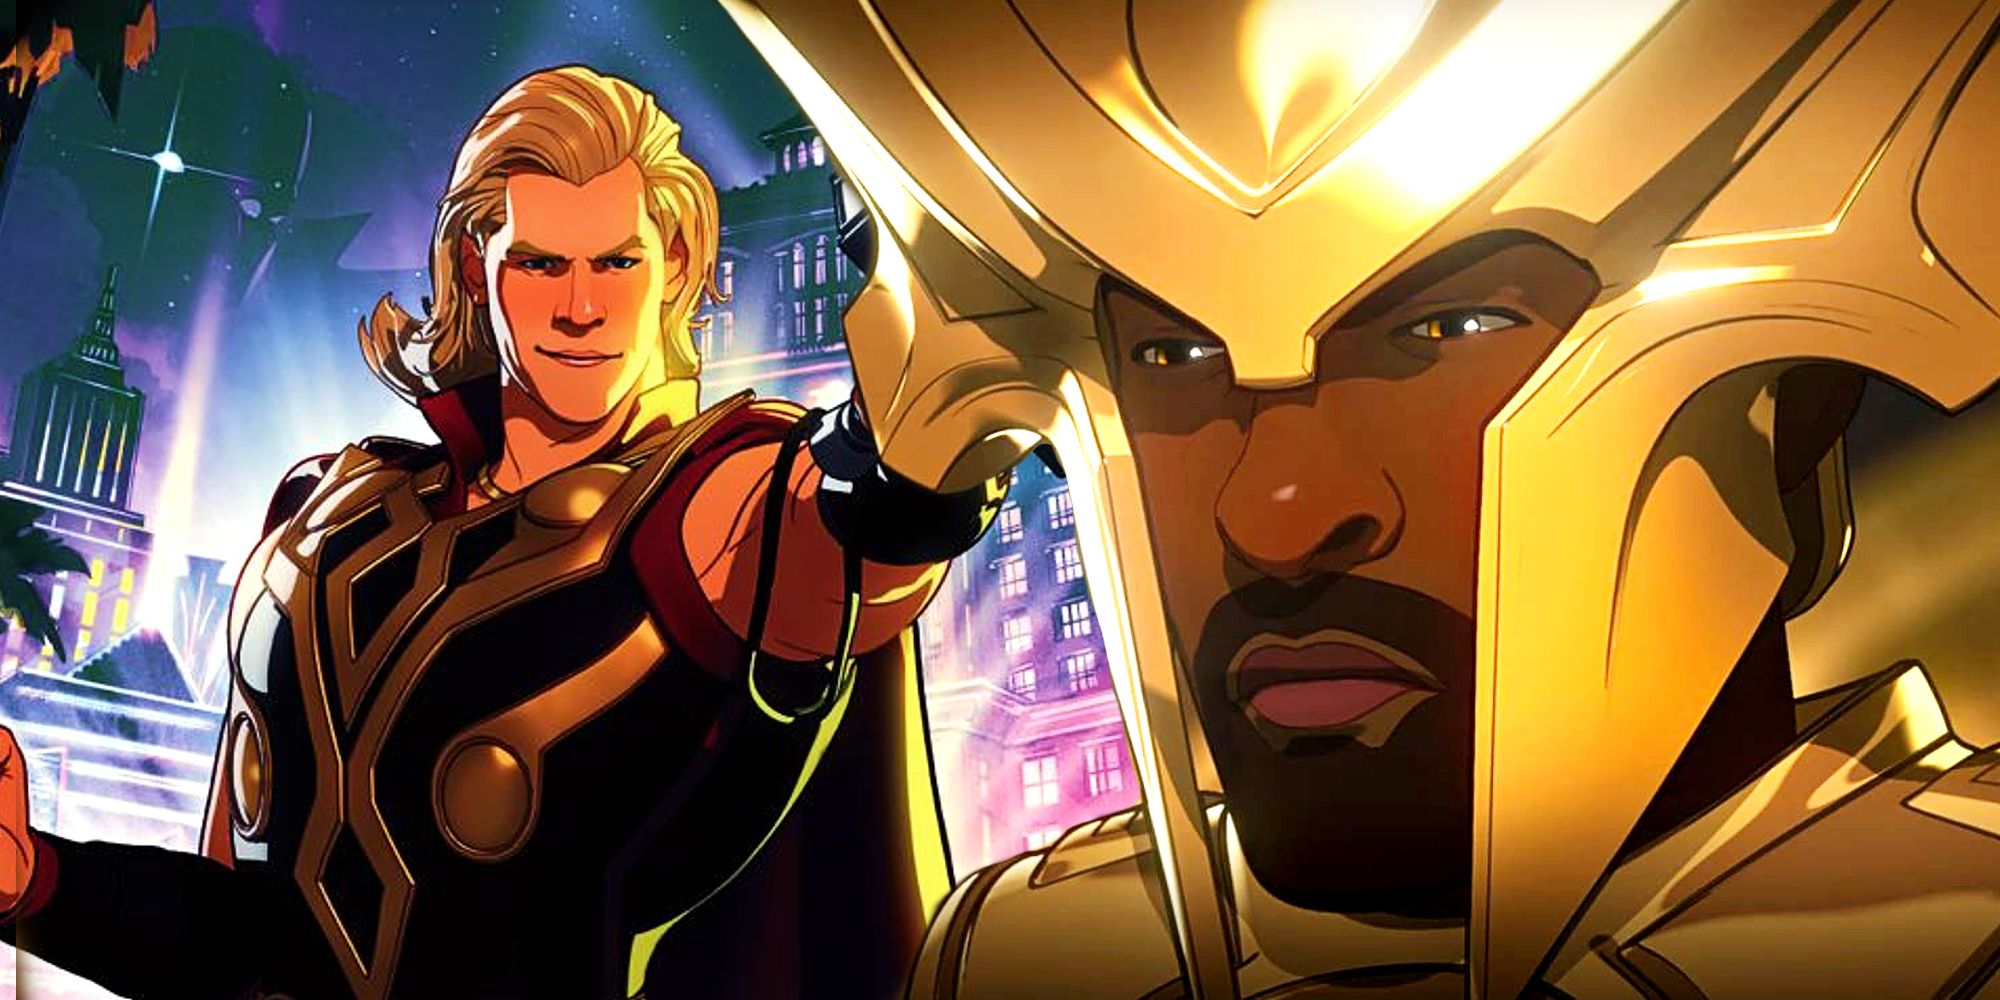 Heimdall and Party Thor in What If Episode 7